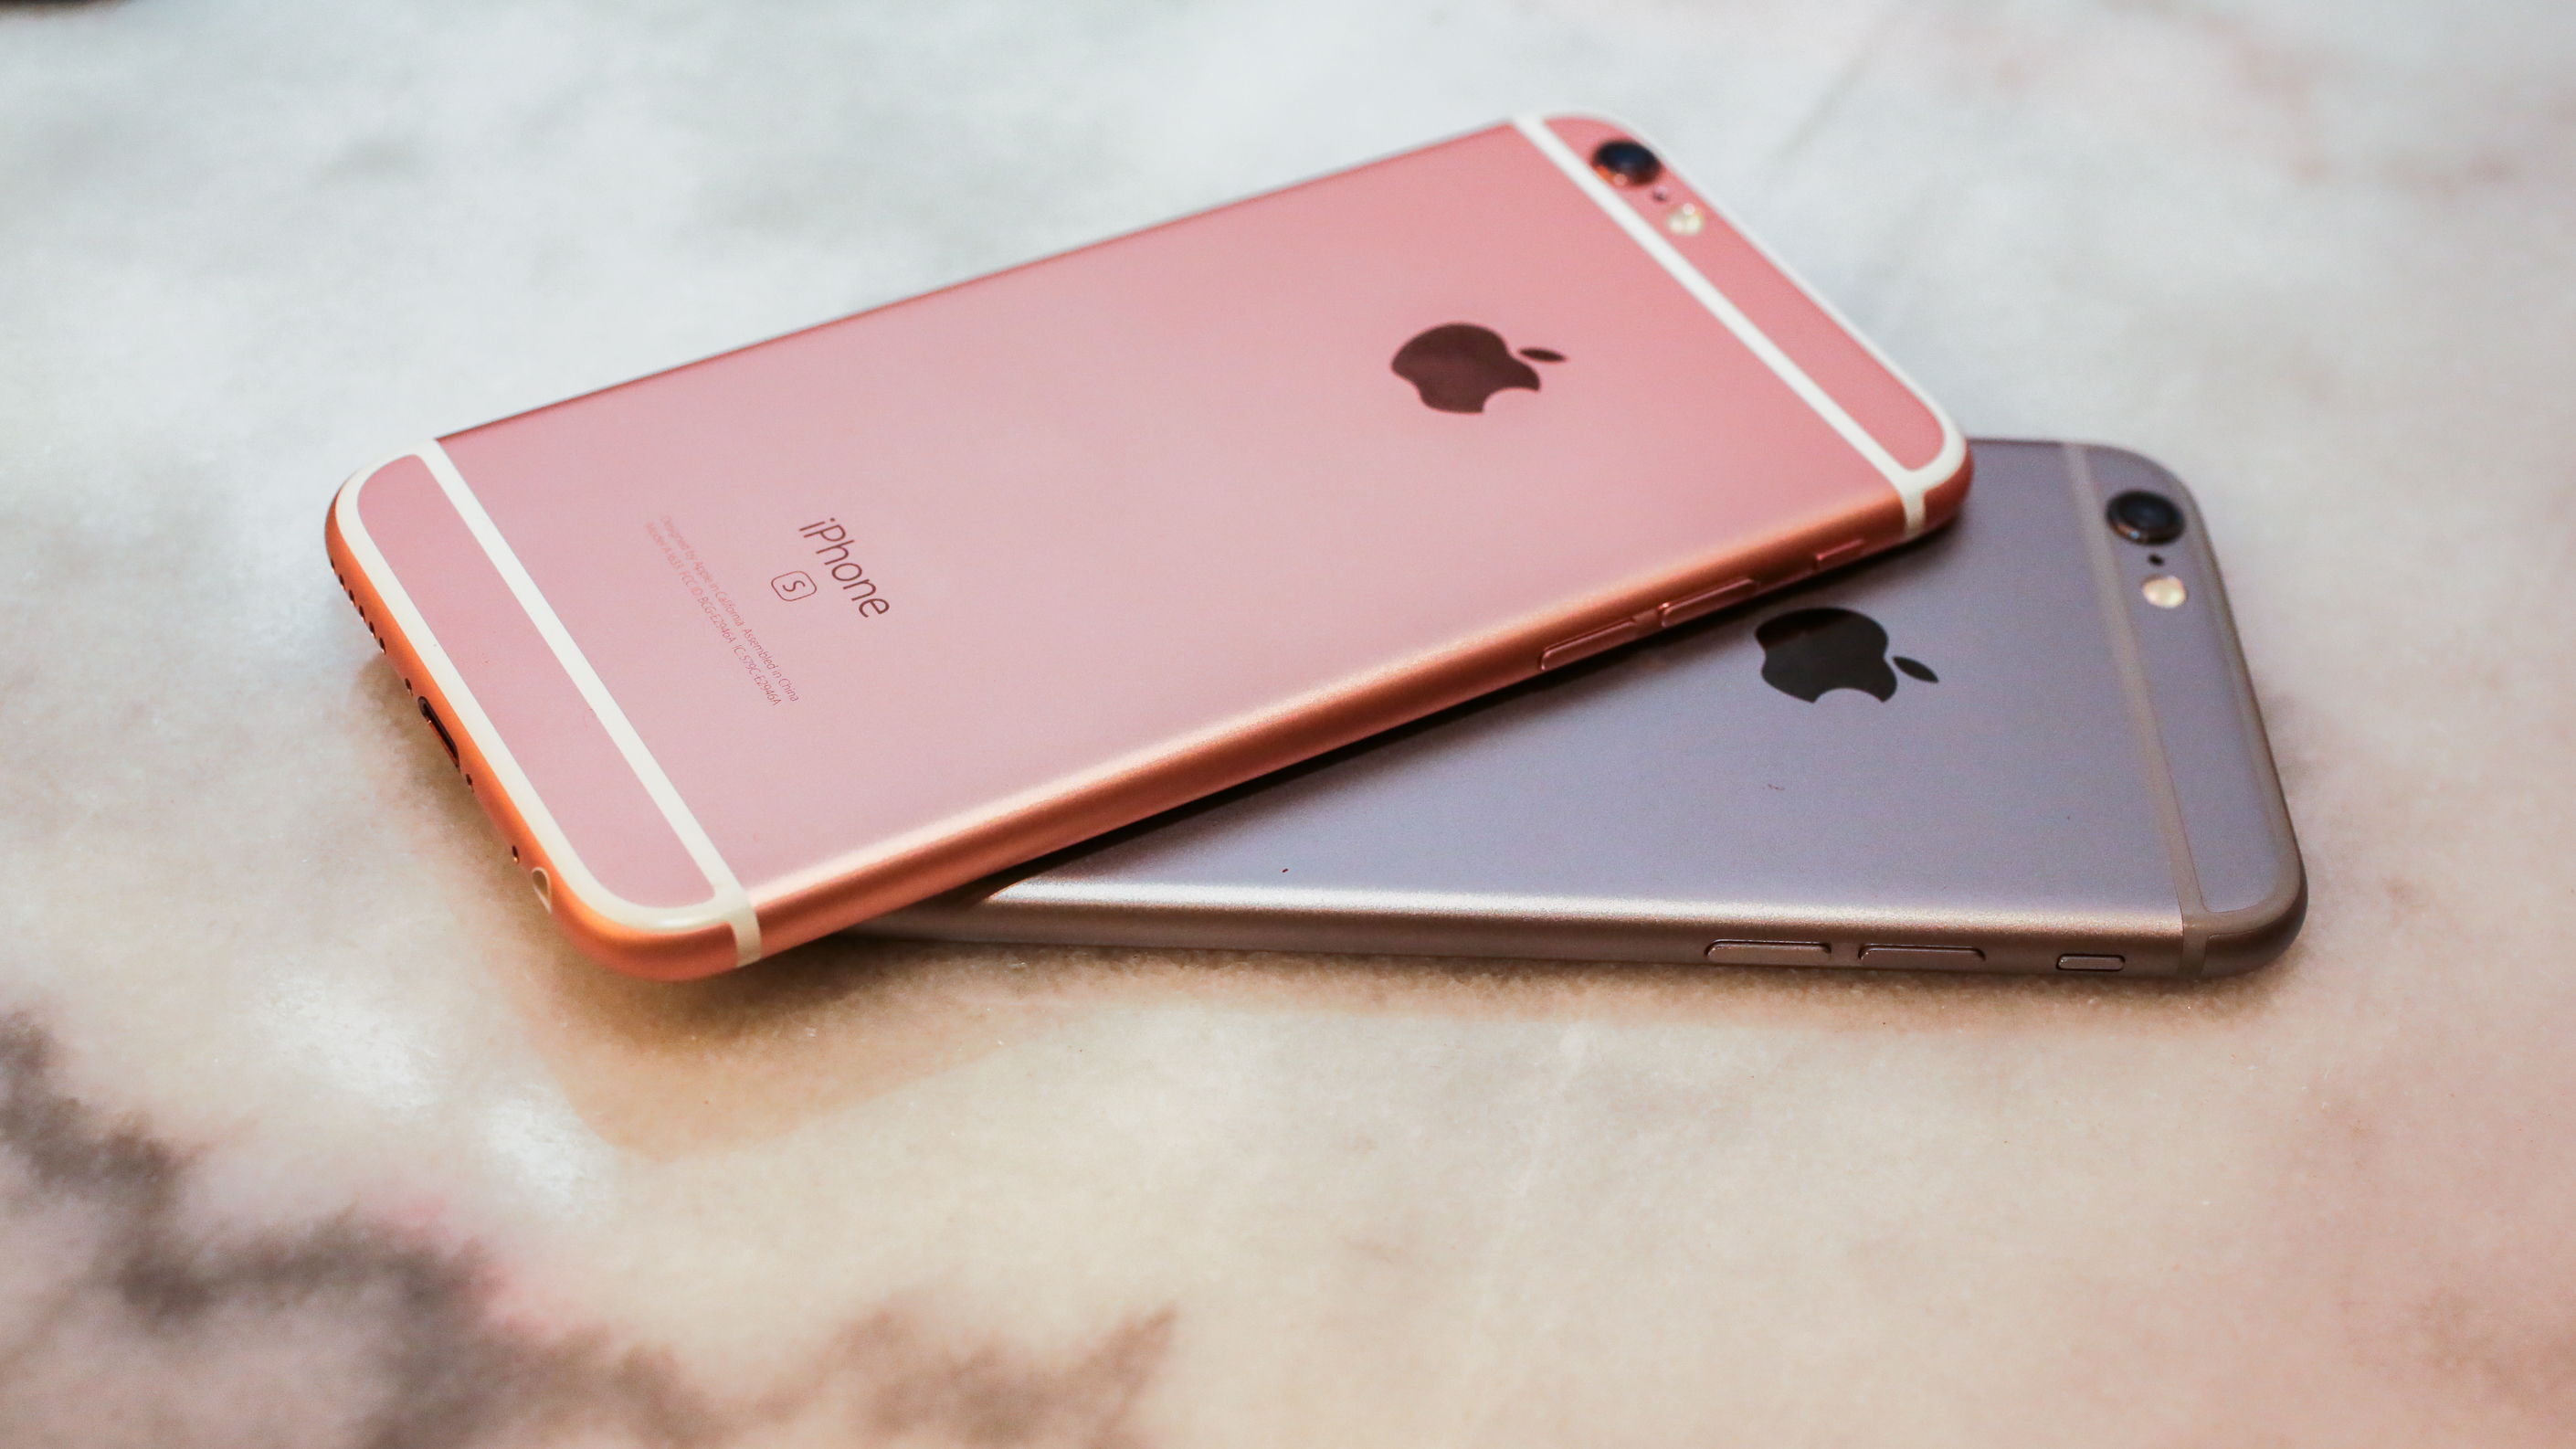 Apple iPhone 6S review: The oldest iPhone can't compete with